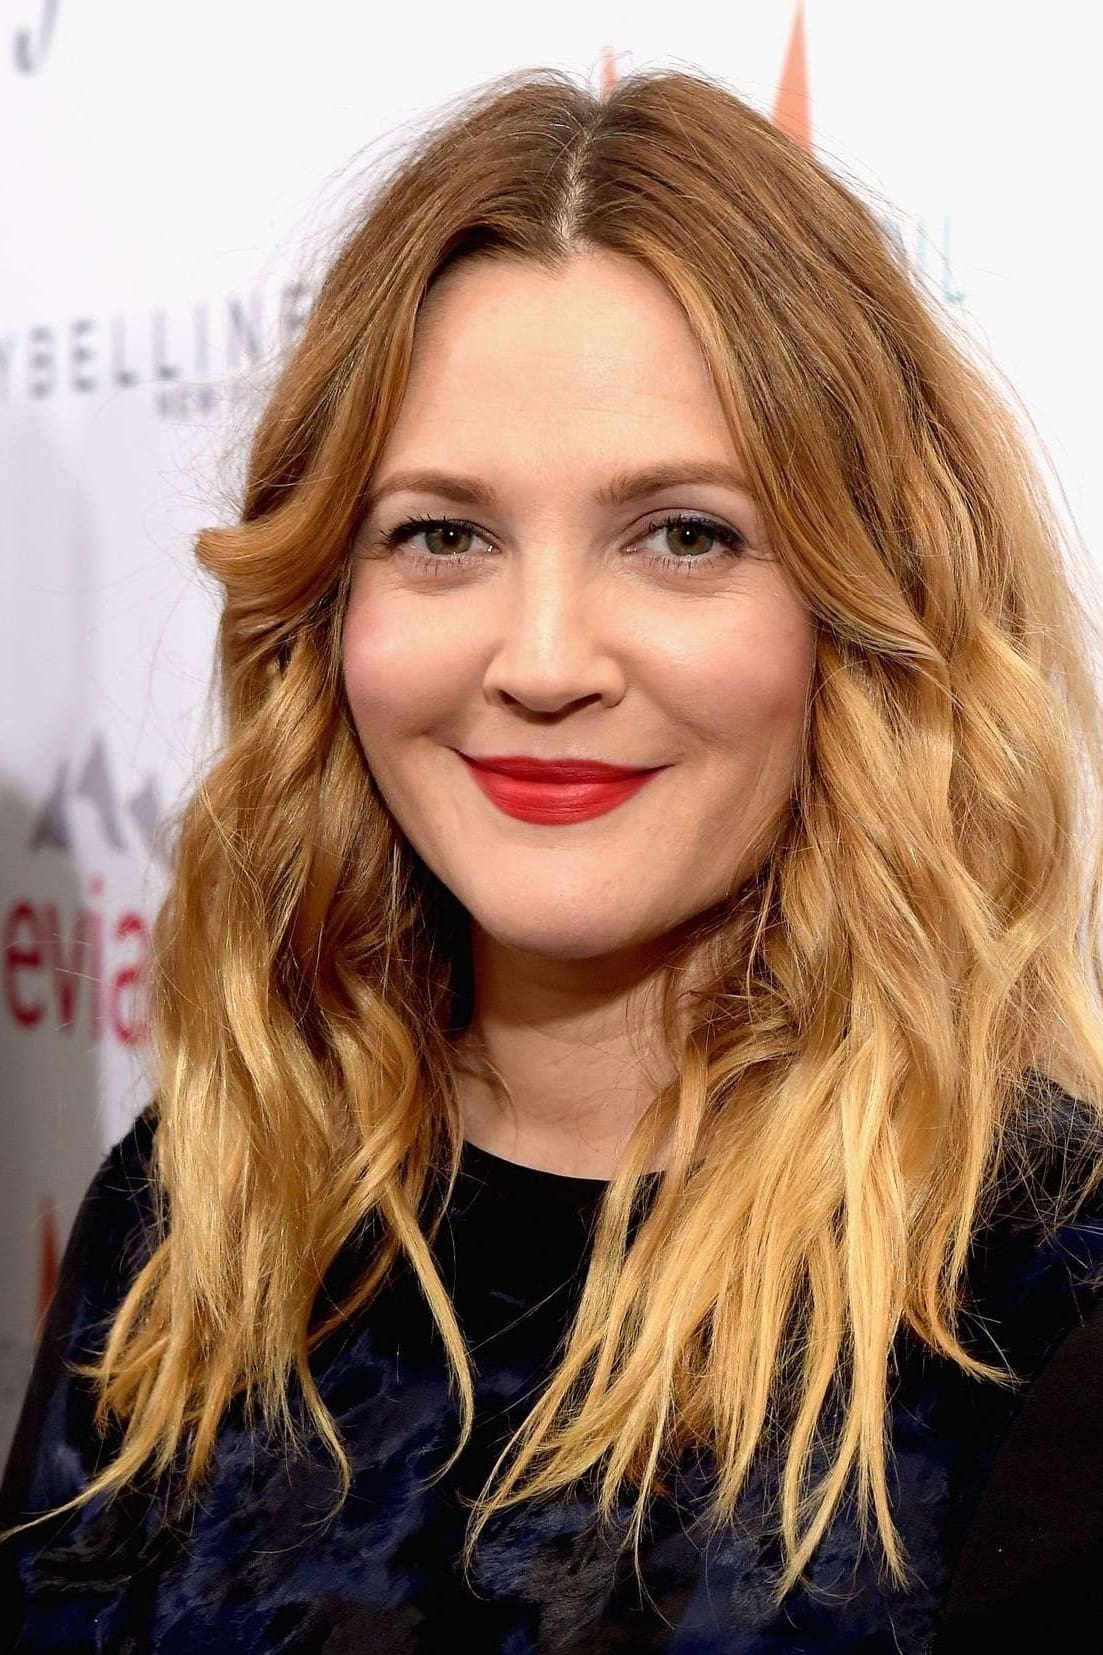 Drew Barrymore Movies And TV Shows